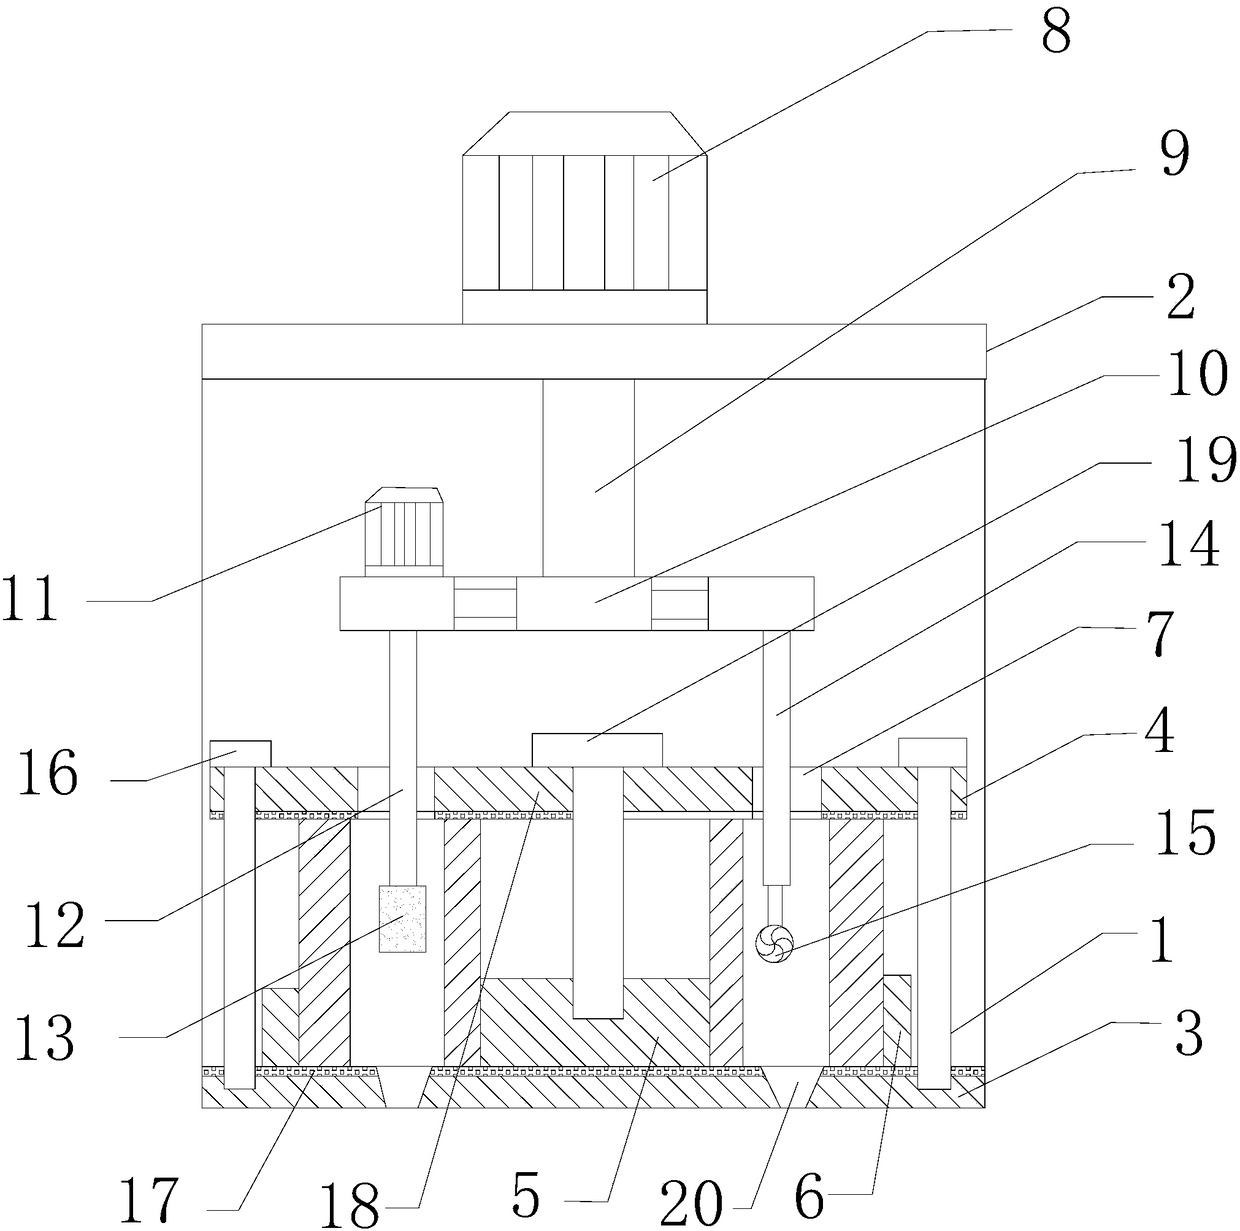 A large bearing ring positioning groove device